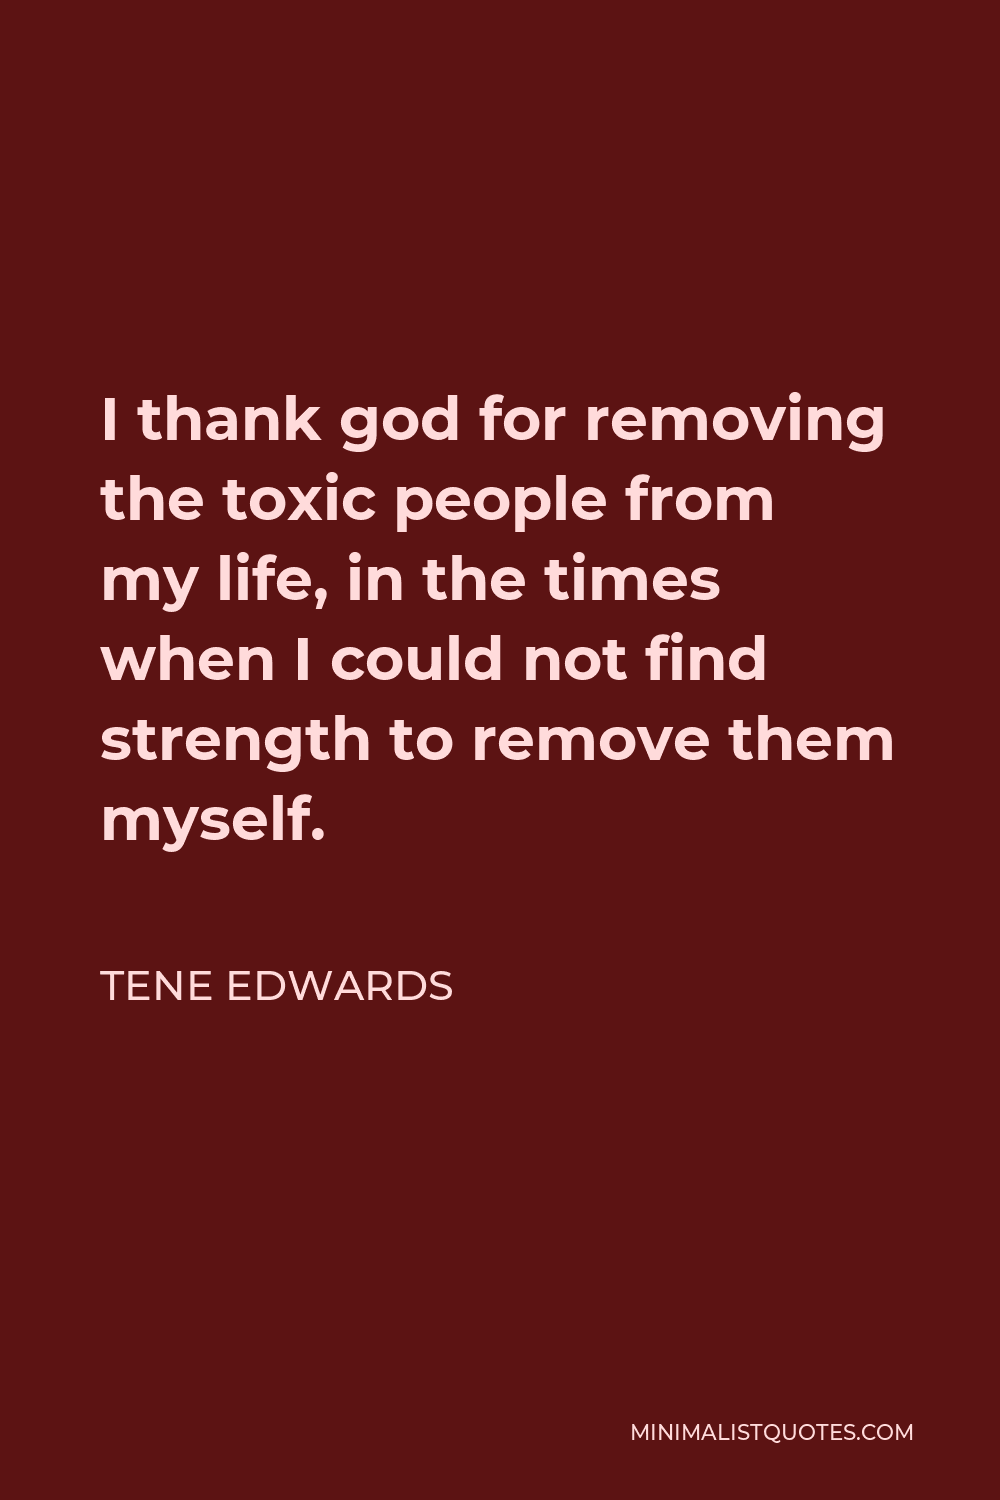 Tene Edwards Quote - I thank god for removing the toxic people from my life, in the times when I could not find strength to remove them myself.